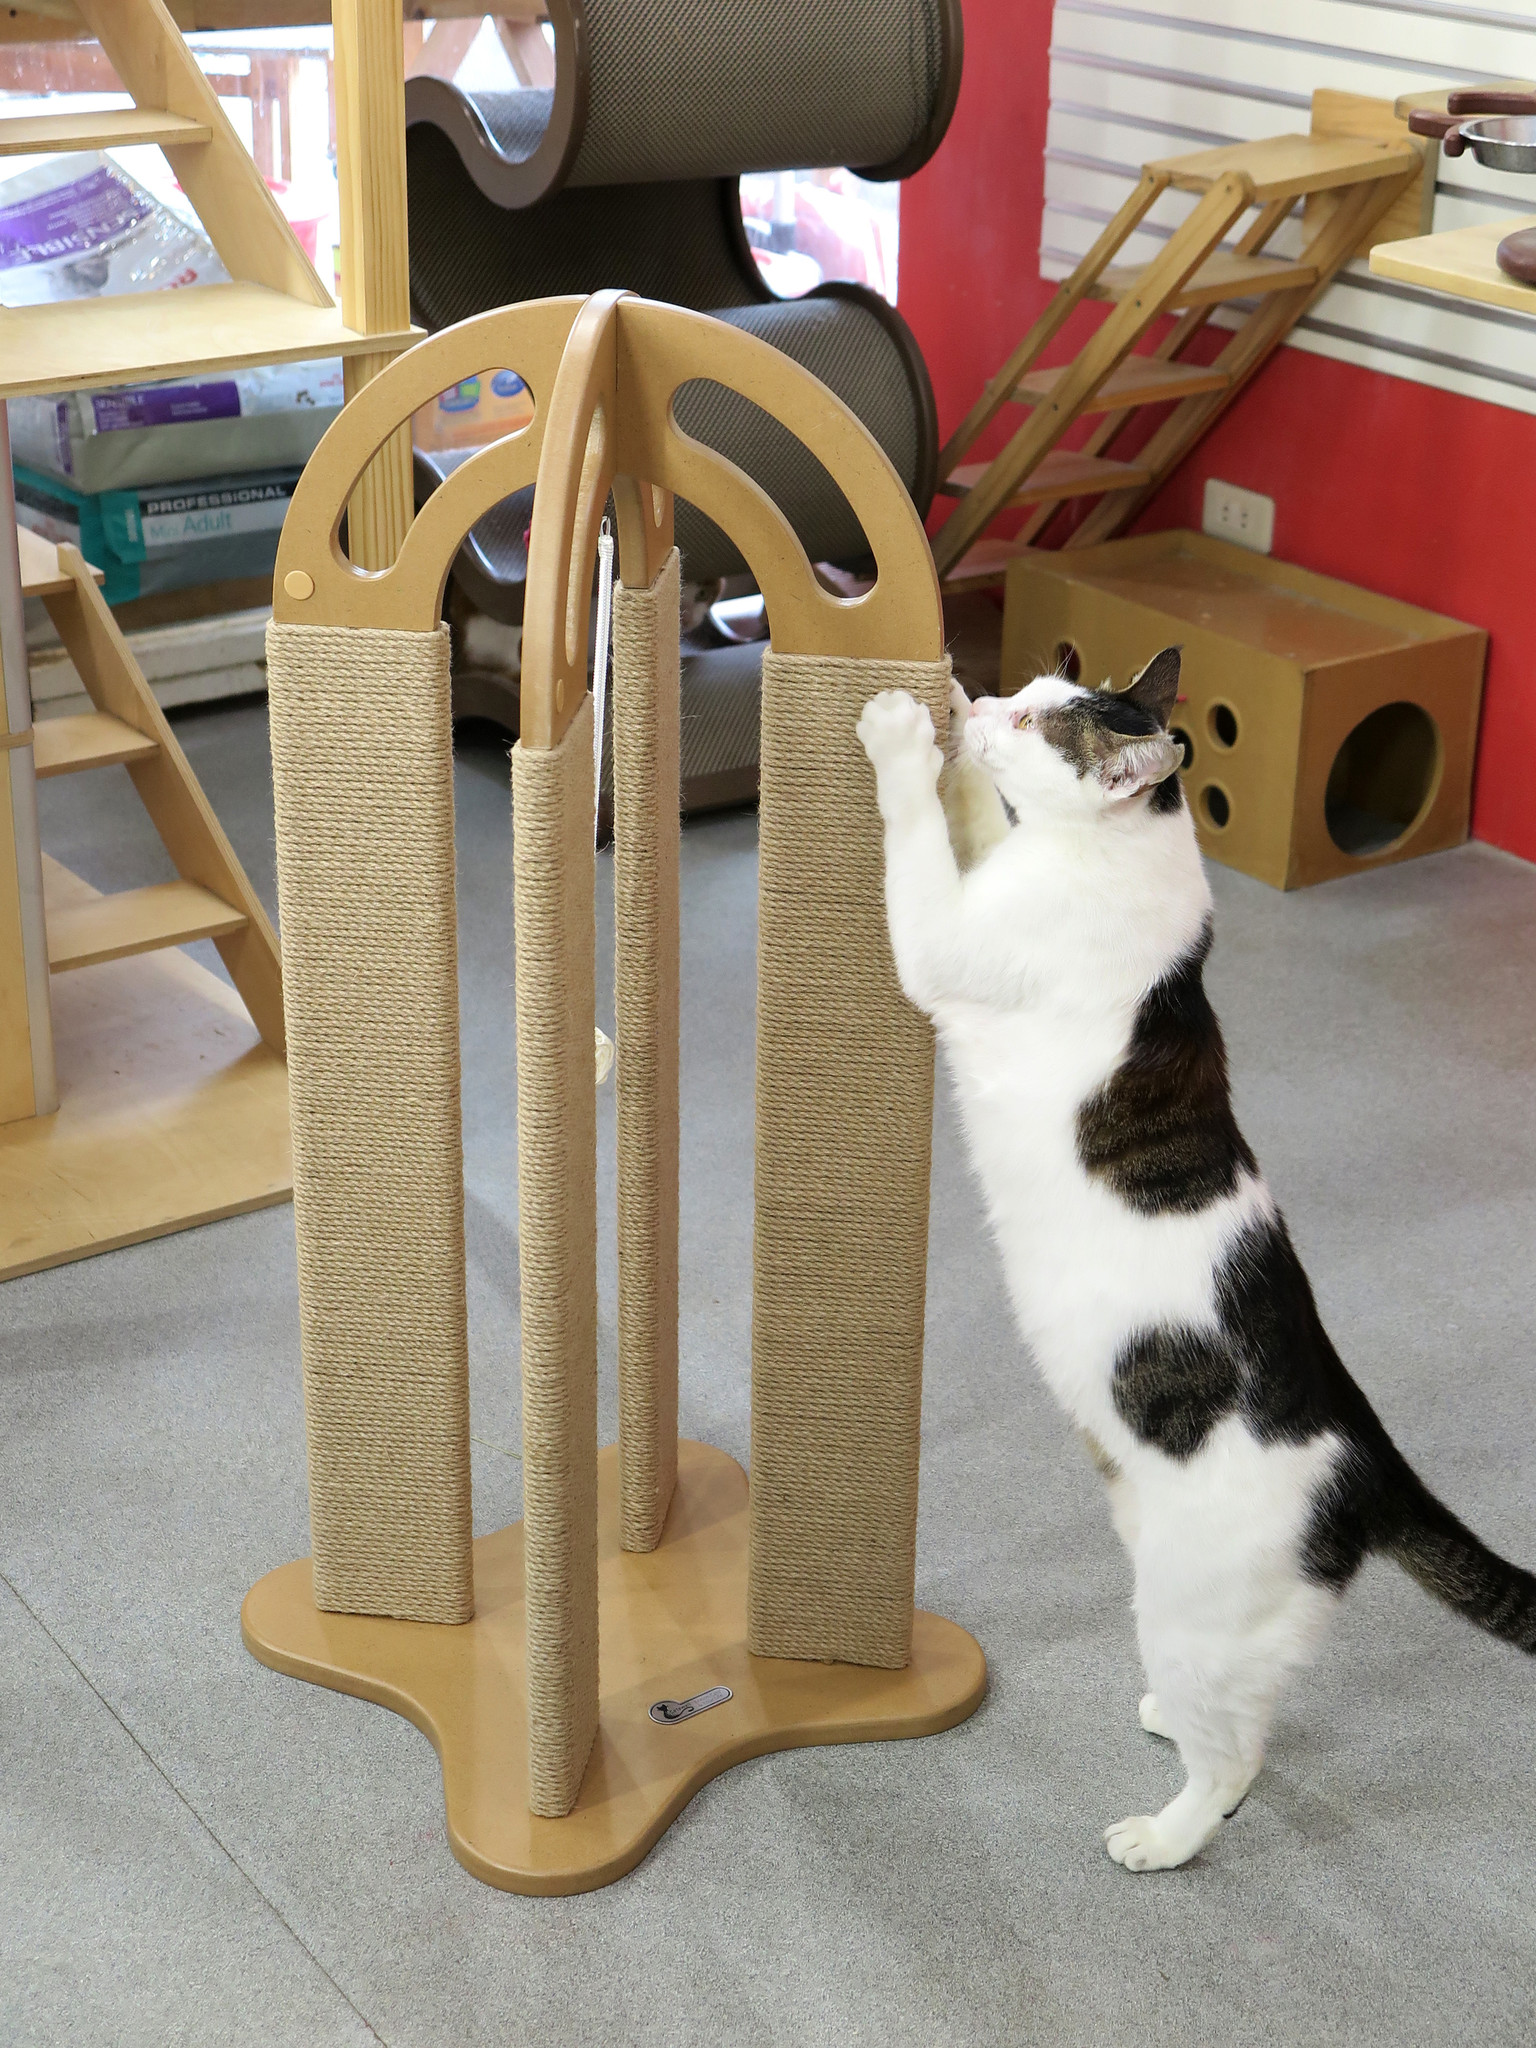 abces Lol De andere dag Design krabpaal - Catswall arched scratching post - Woozi dierenwinkel